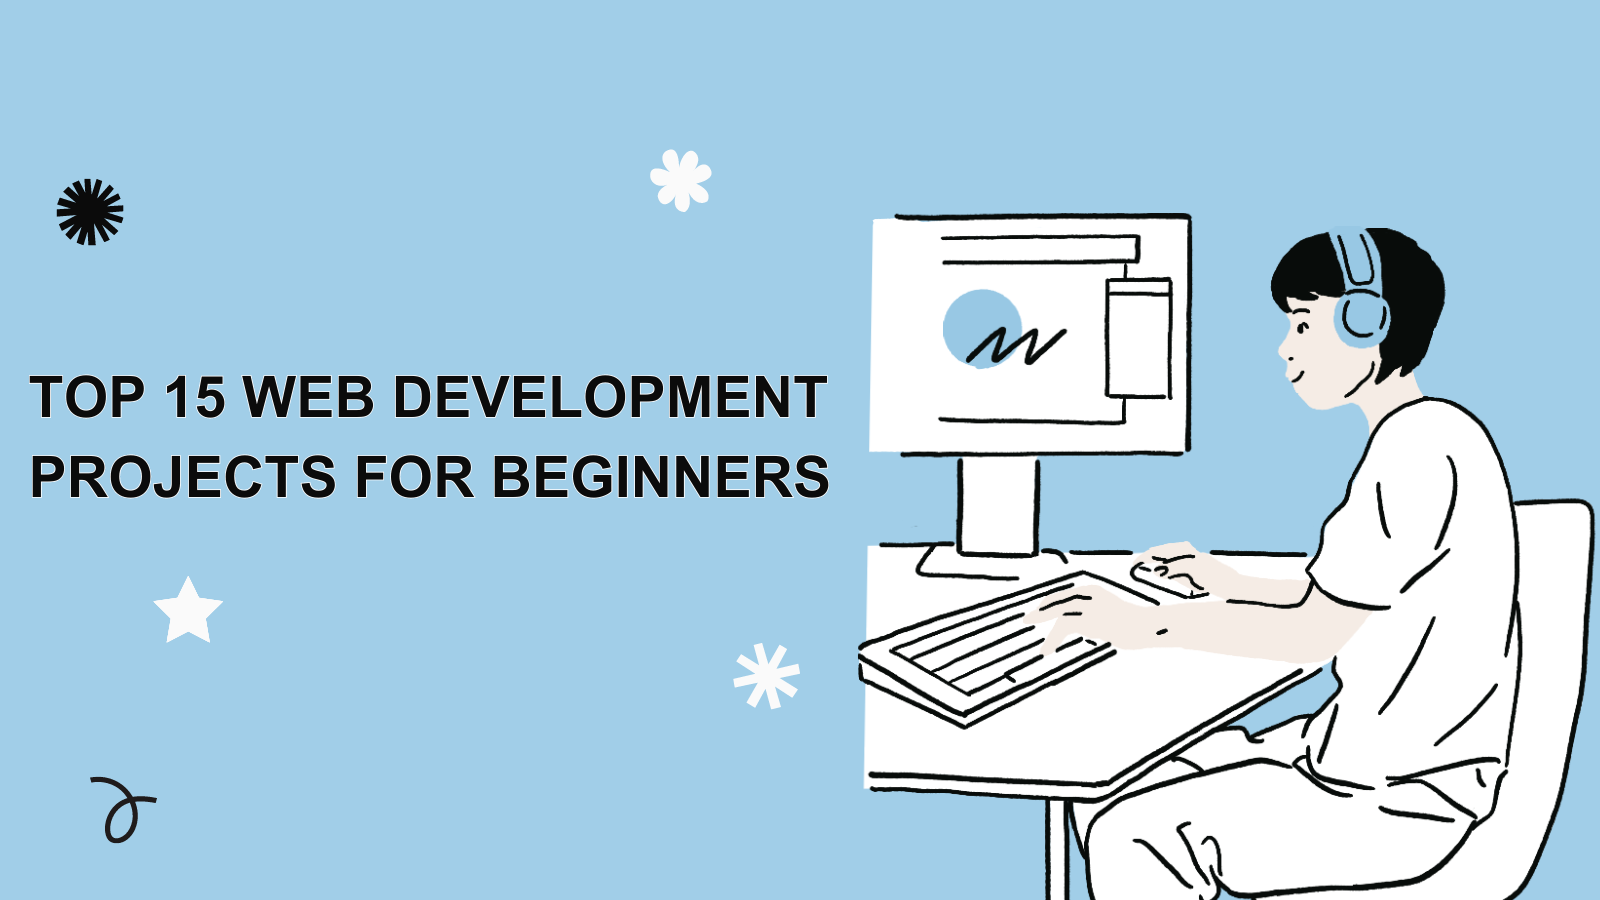 Top 15 Web Development Projects for Beginners